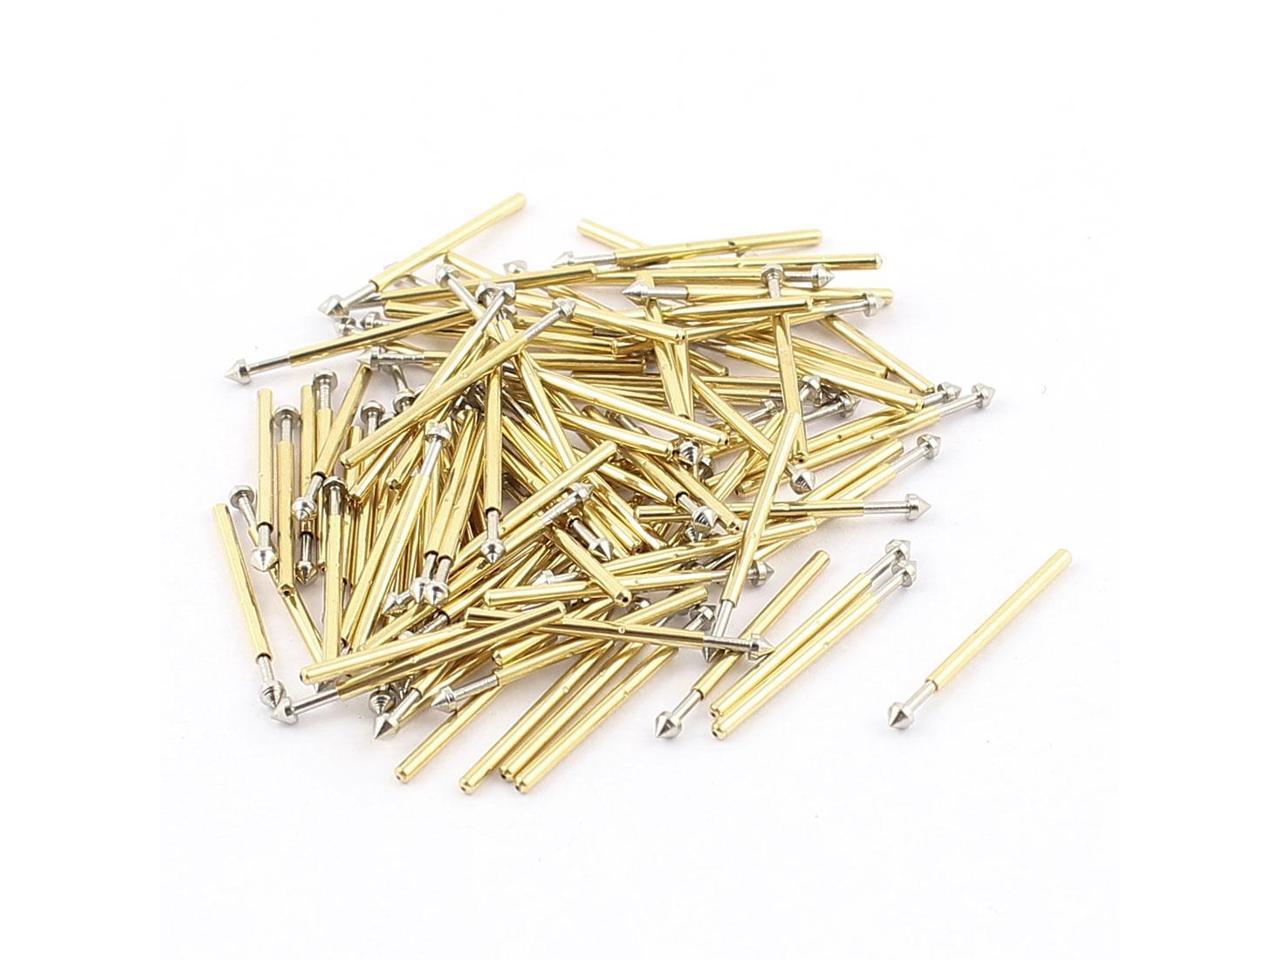 100 Pieces P50-D2 Dia 0.68mm Length 16mm Spring Test Probe Pogo Pin 